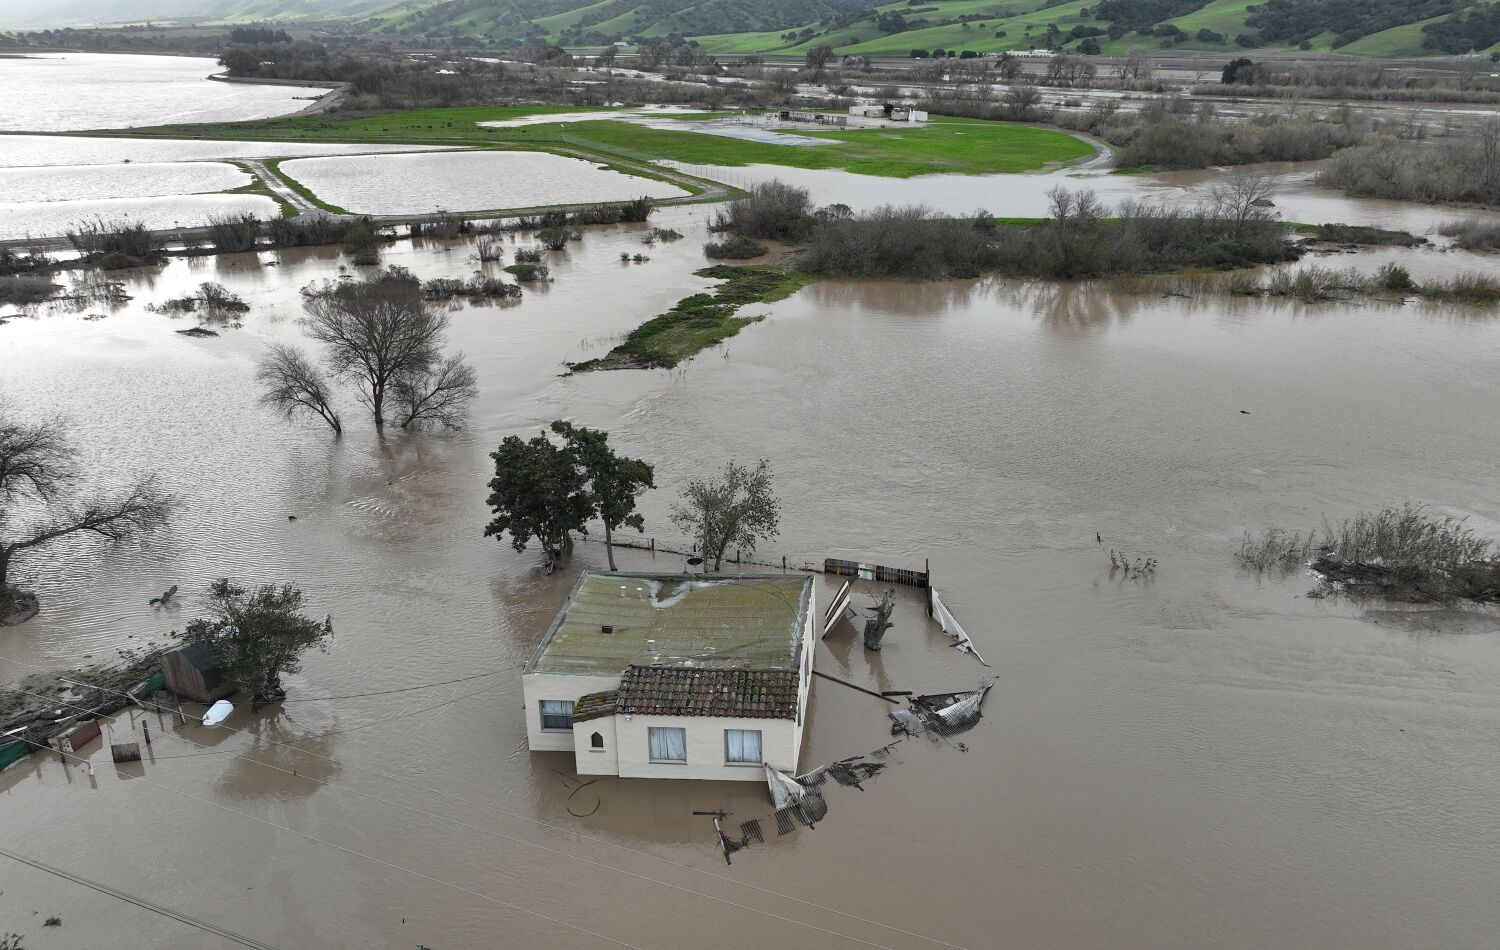 Editorial: Restore California's floodplains to capture more stormwater, protect human life